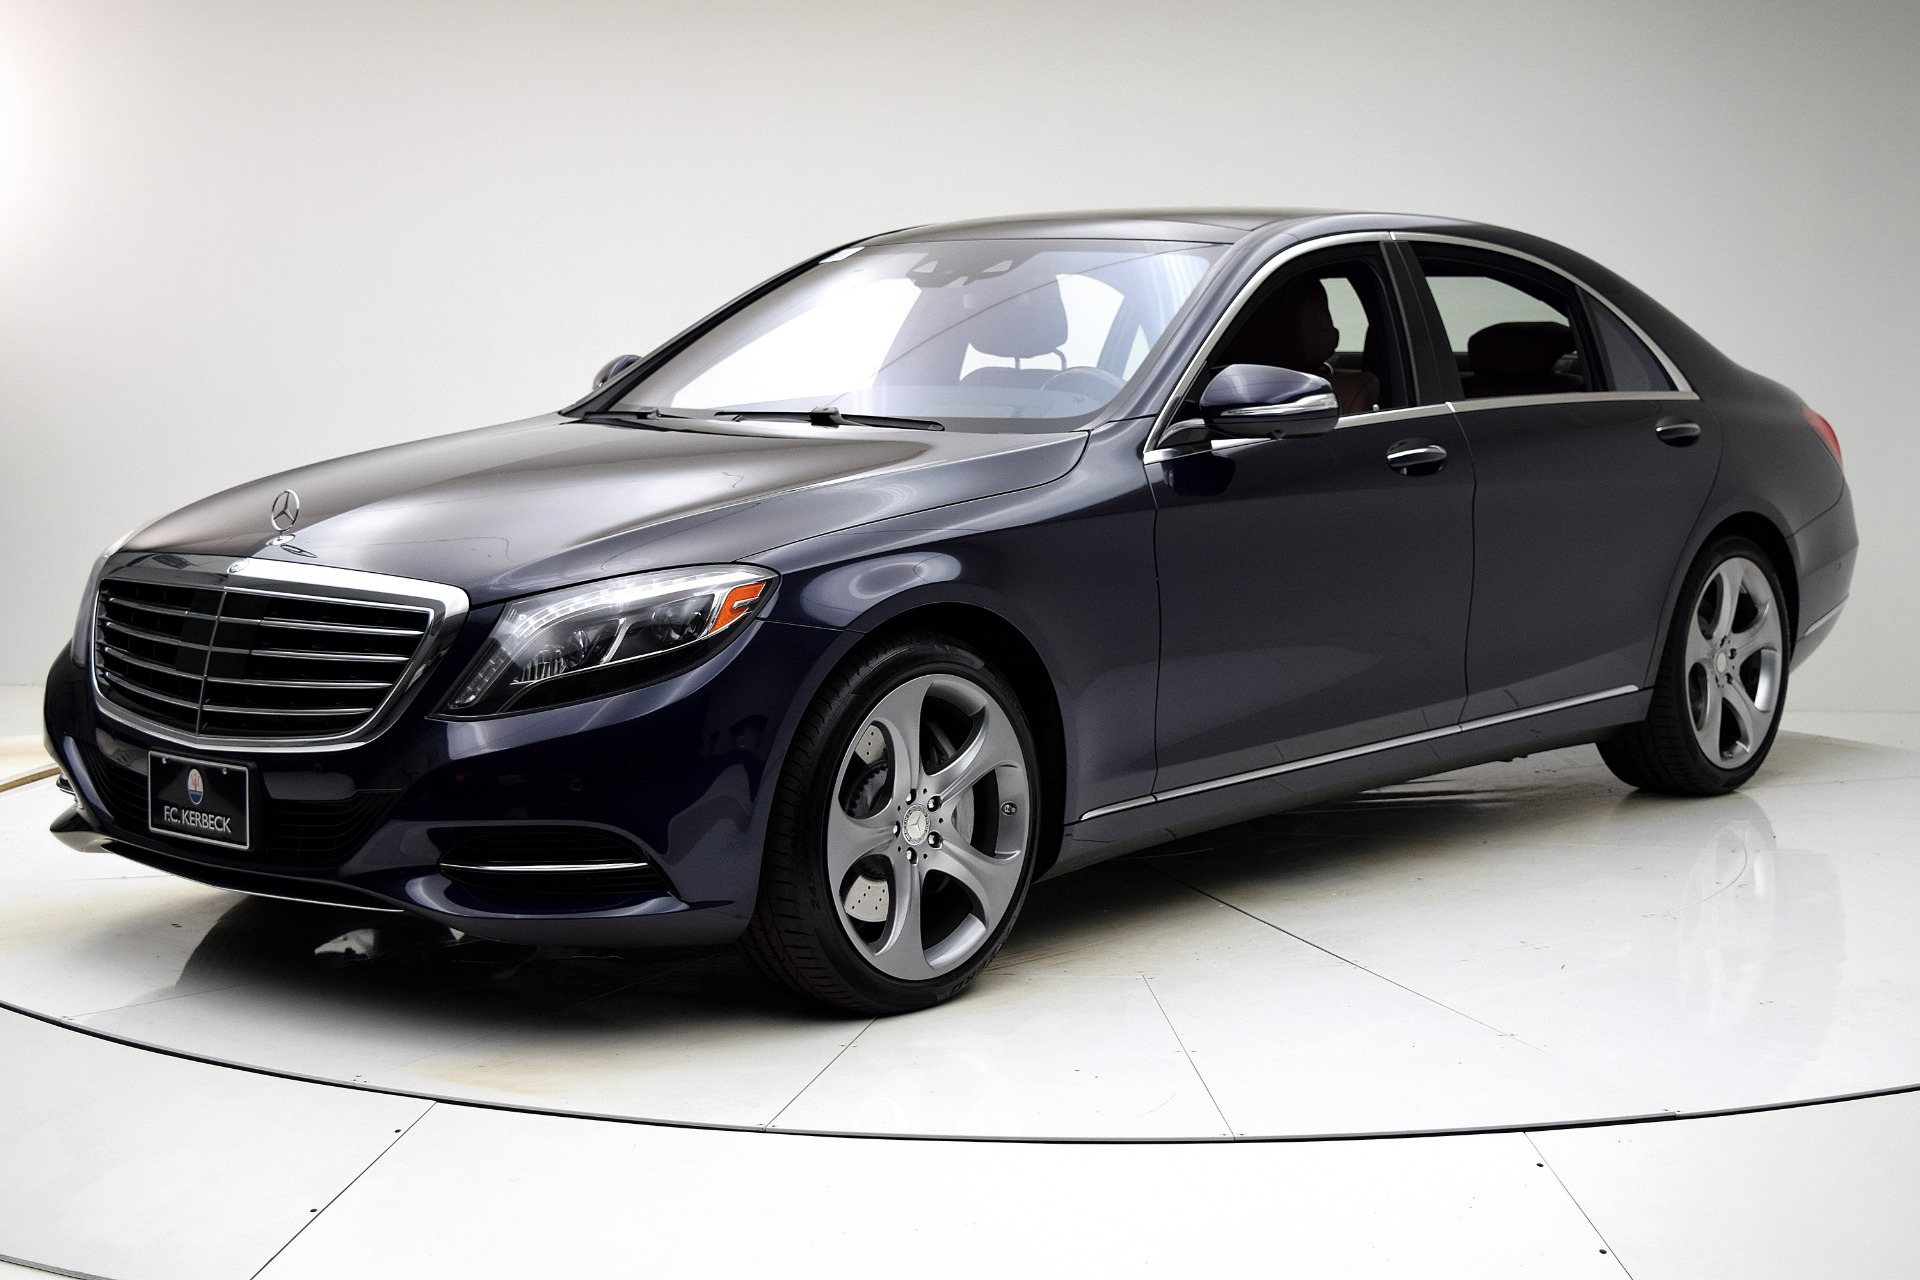 Used 2015 Mercedes-Benz S-Class S550 4MATIC For Sale ($39,880) | F.C ...